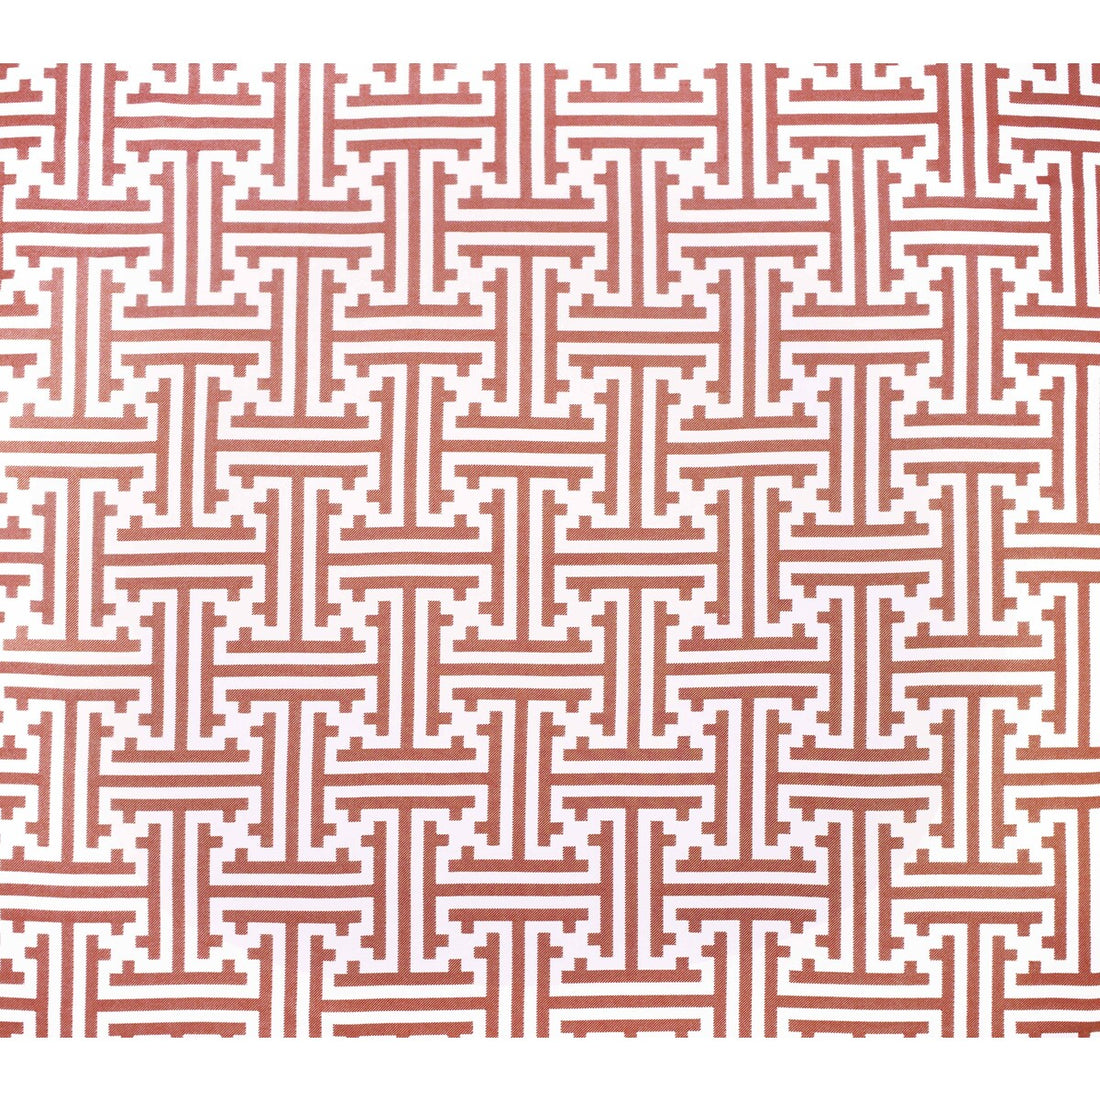 Clark fabric in rojo color - pattern GDT5380.1.0 - by Gaston y Daniela in the Gaston Africalia collection